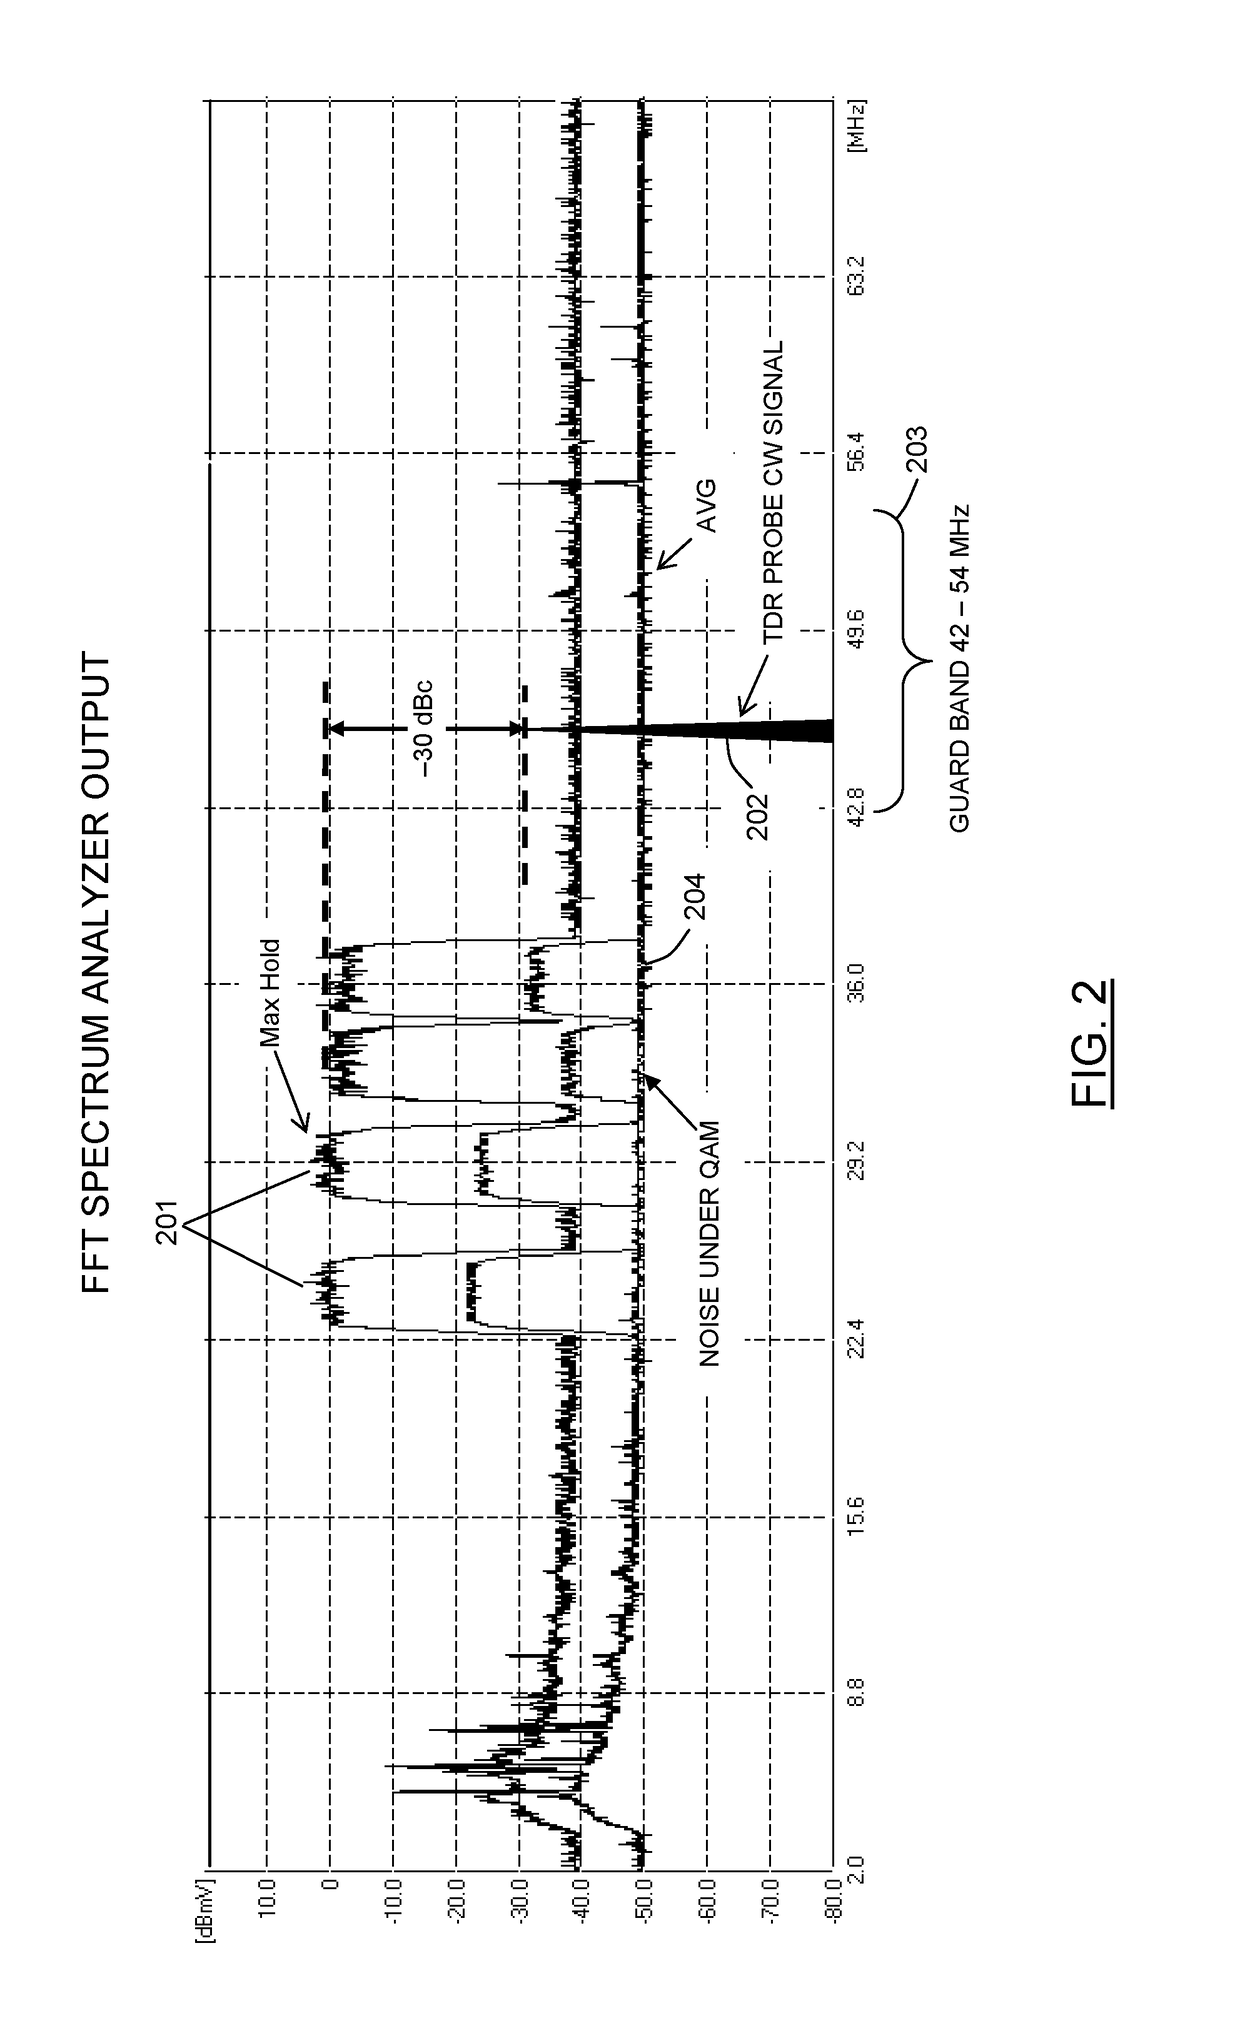 Network Traffic-Compatible Time Domain Reflectometer